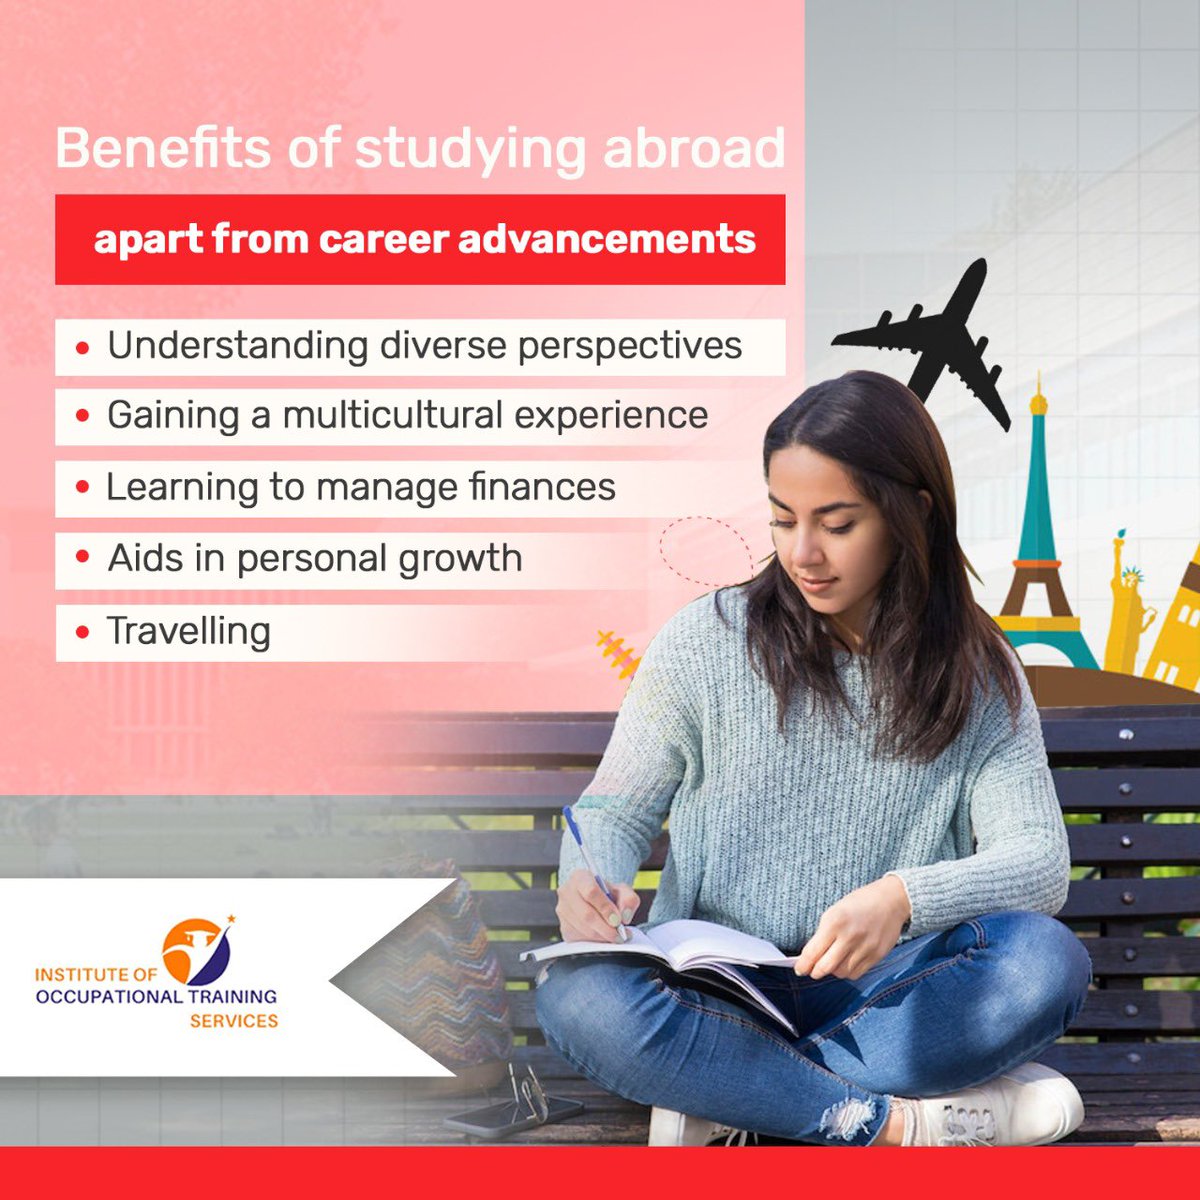 Moving abroad for further studies can be daunting, but there is a lot one can learn during the process. #Studyingabroad can be a truly enriching process and is not just limited to #careeradvancements.
#iotspro #educationgoals #studyabroad #dreamjob #dreamcareer #studyinmalta